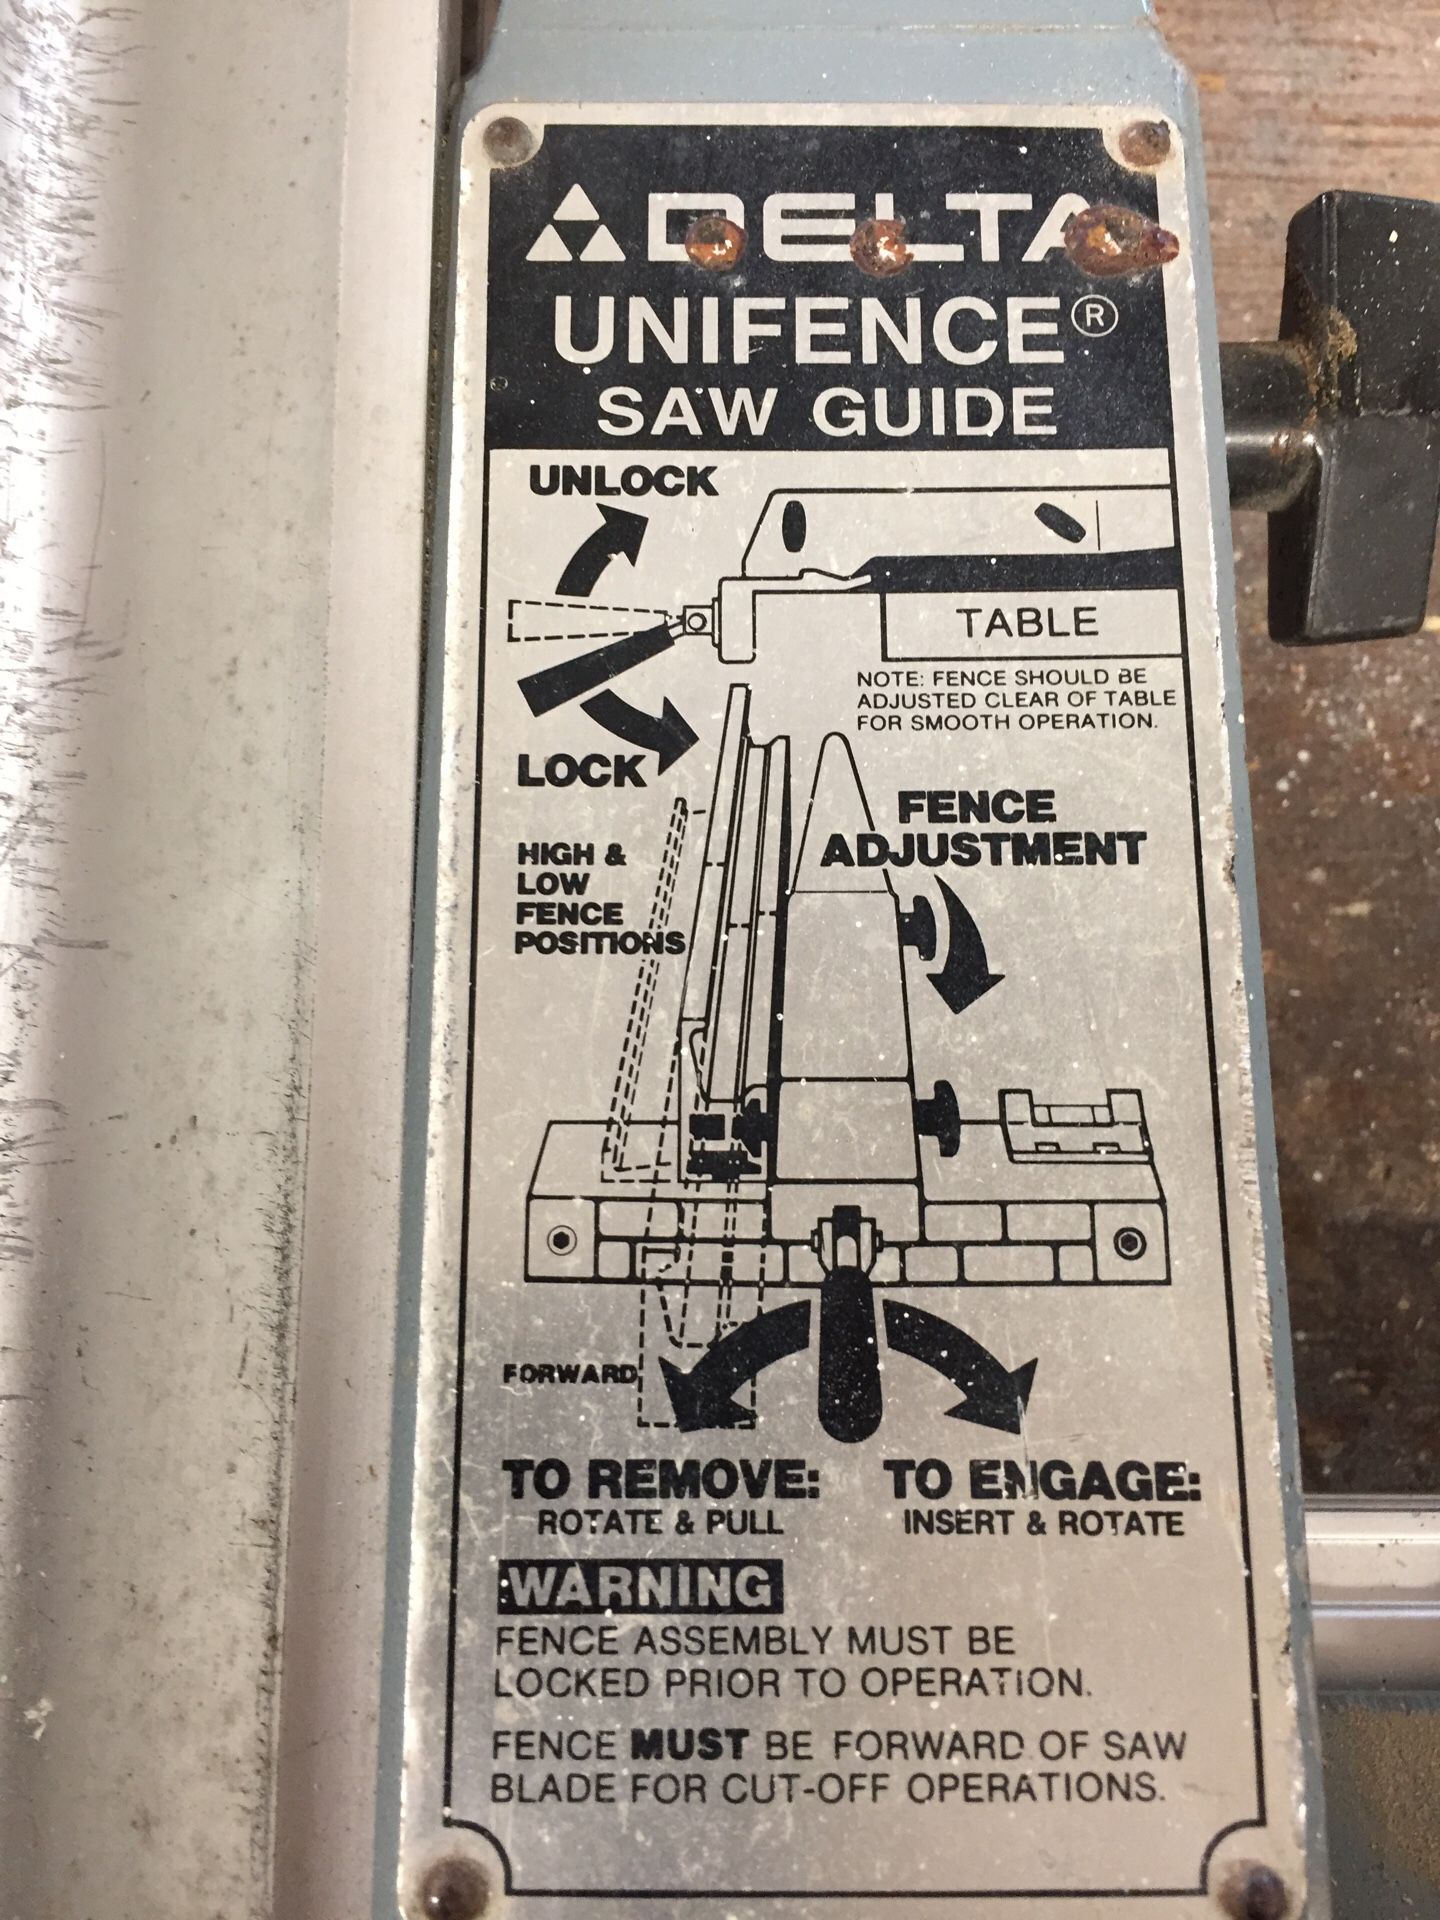 Delta Unifence saw Guide